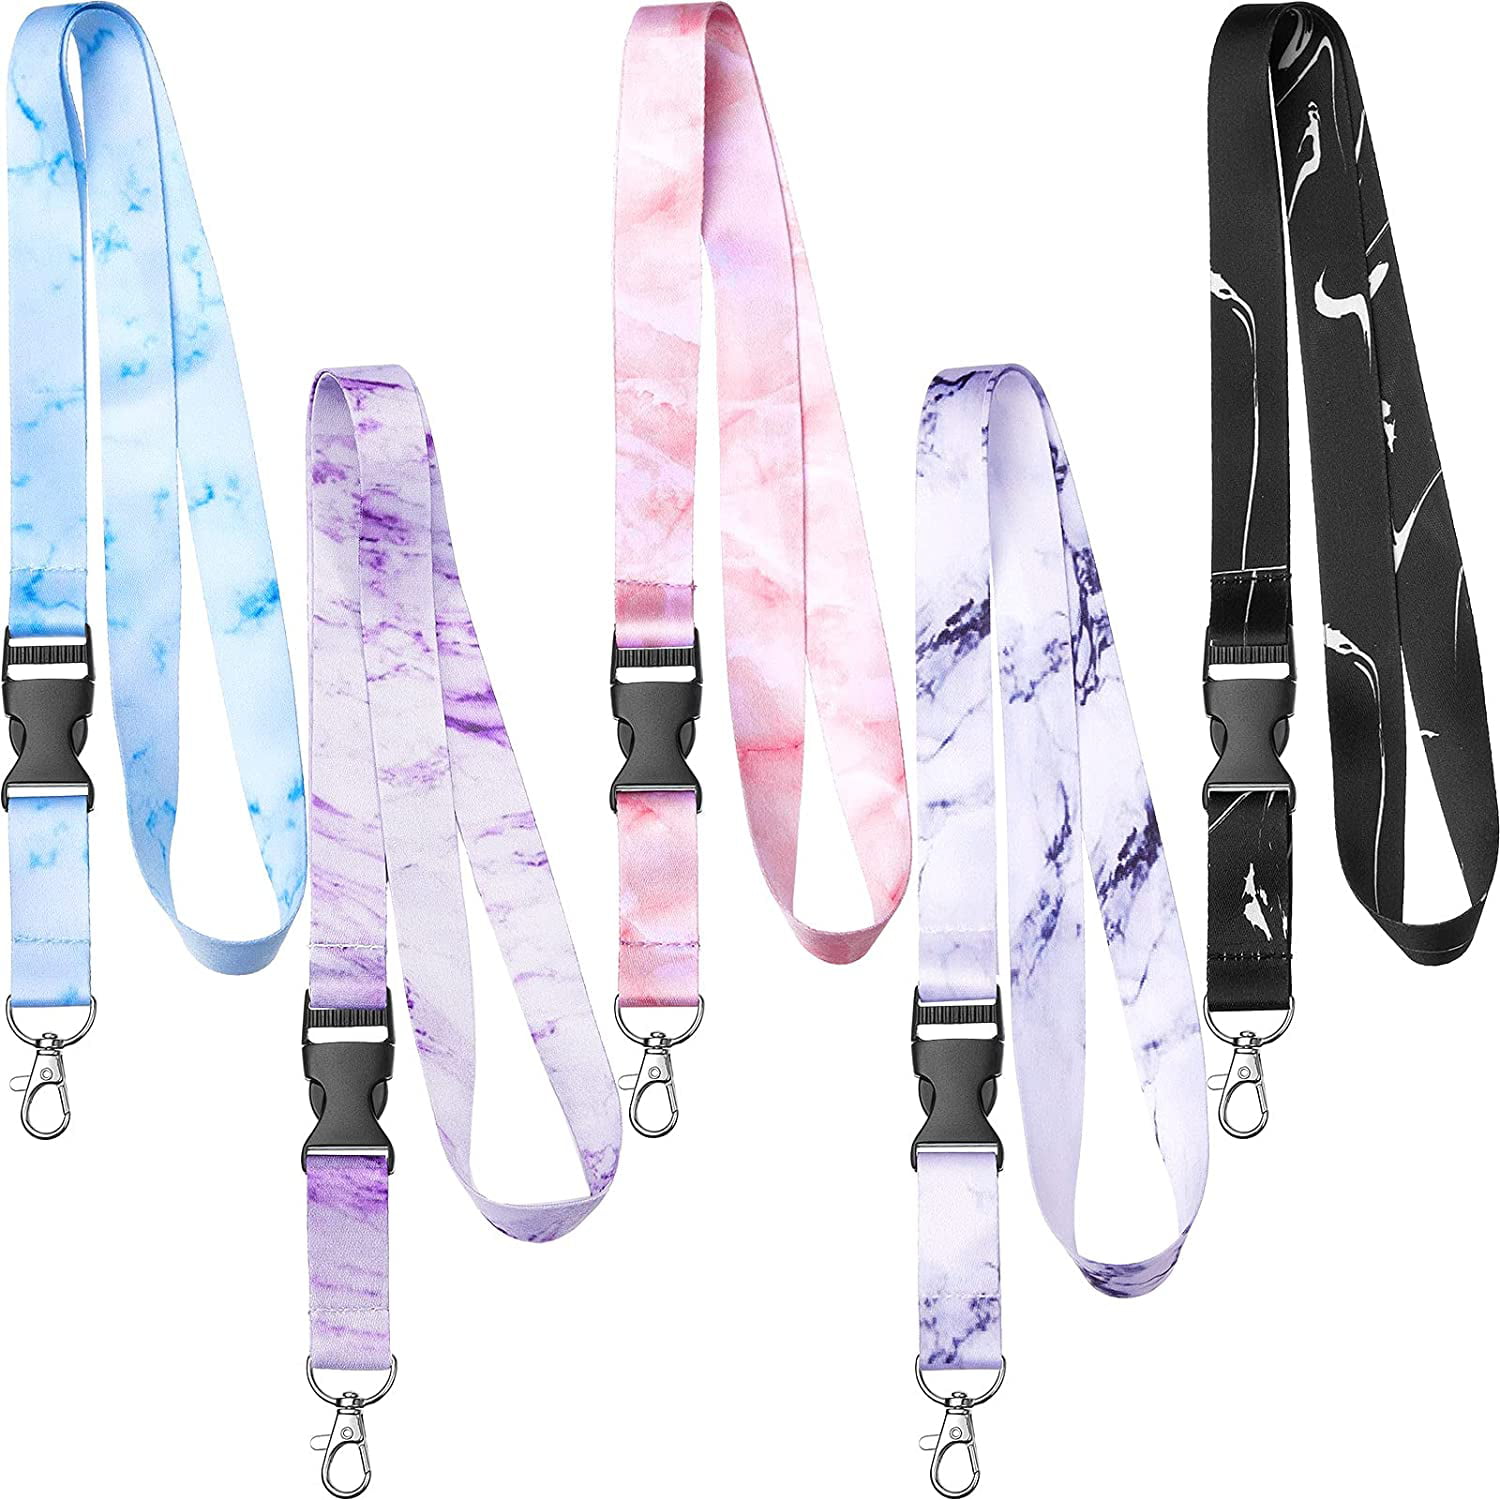 Supgear Print Lanyard with ID/Phone Holder,Neck Strap for Women and Girls Wristlet Keychain Premium Printed Keychain Lanyard for Key,Mobile Phone,Card Holders ID Badges Adjustable Cherry Blossoms 